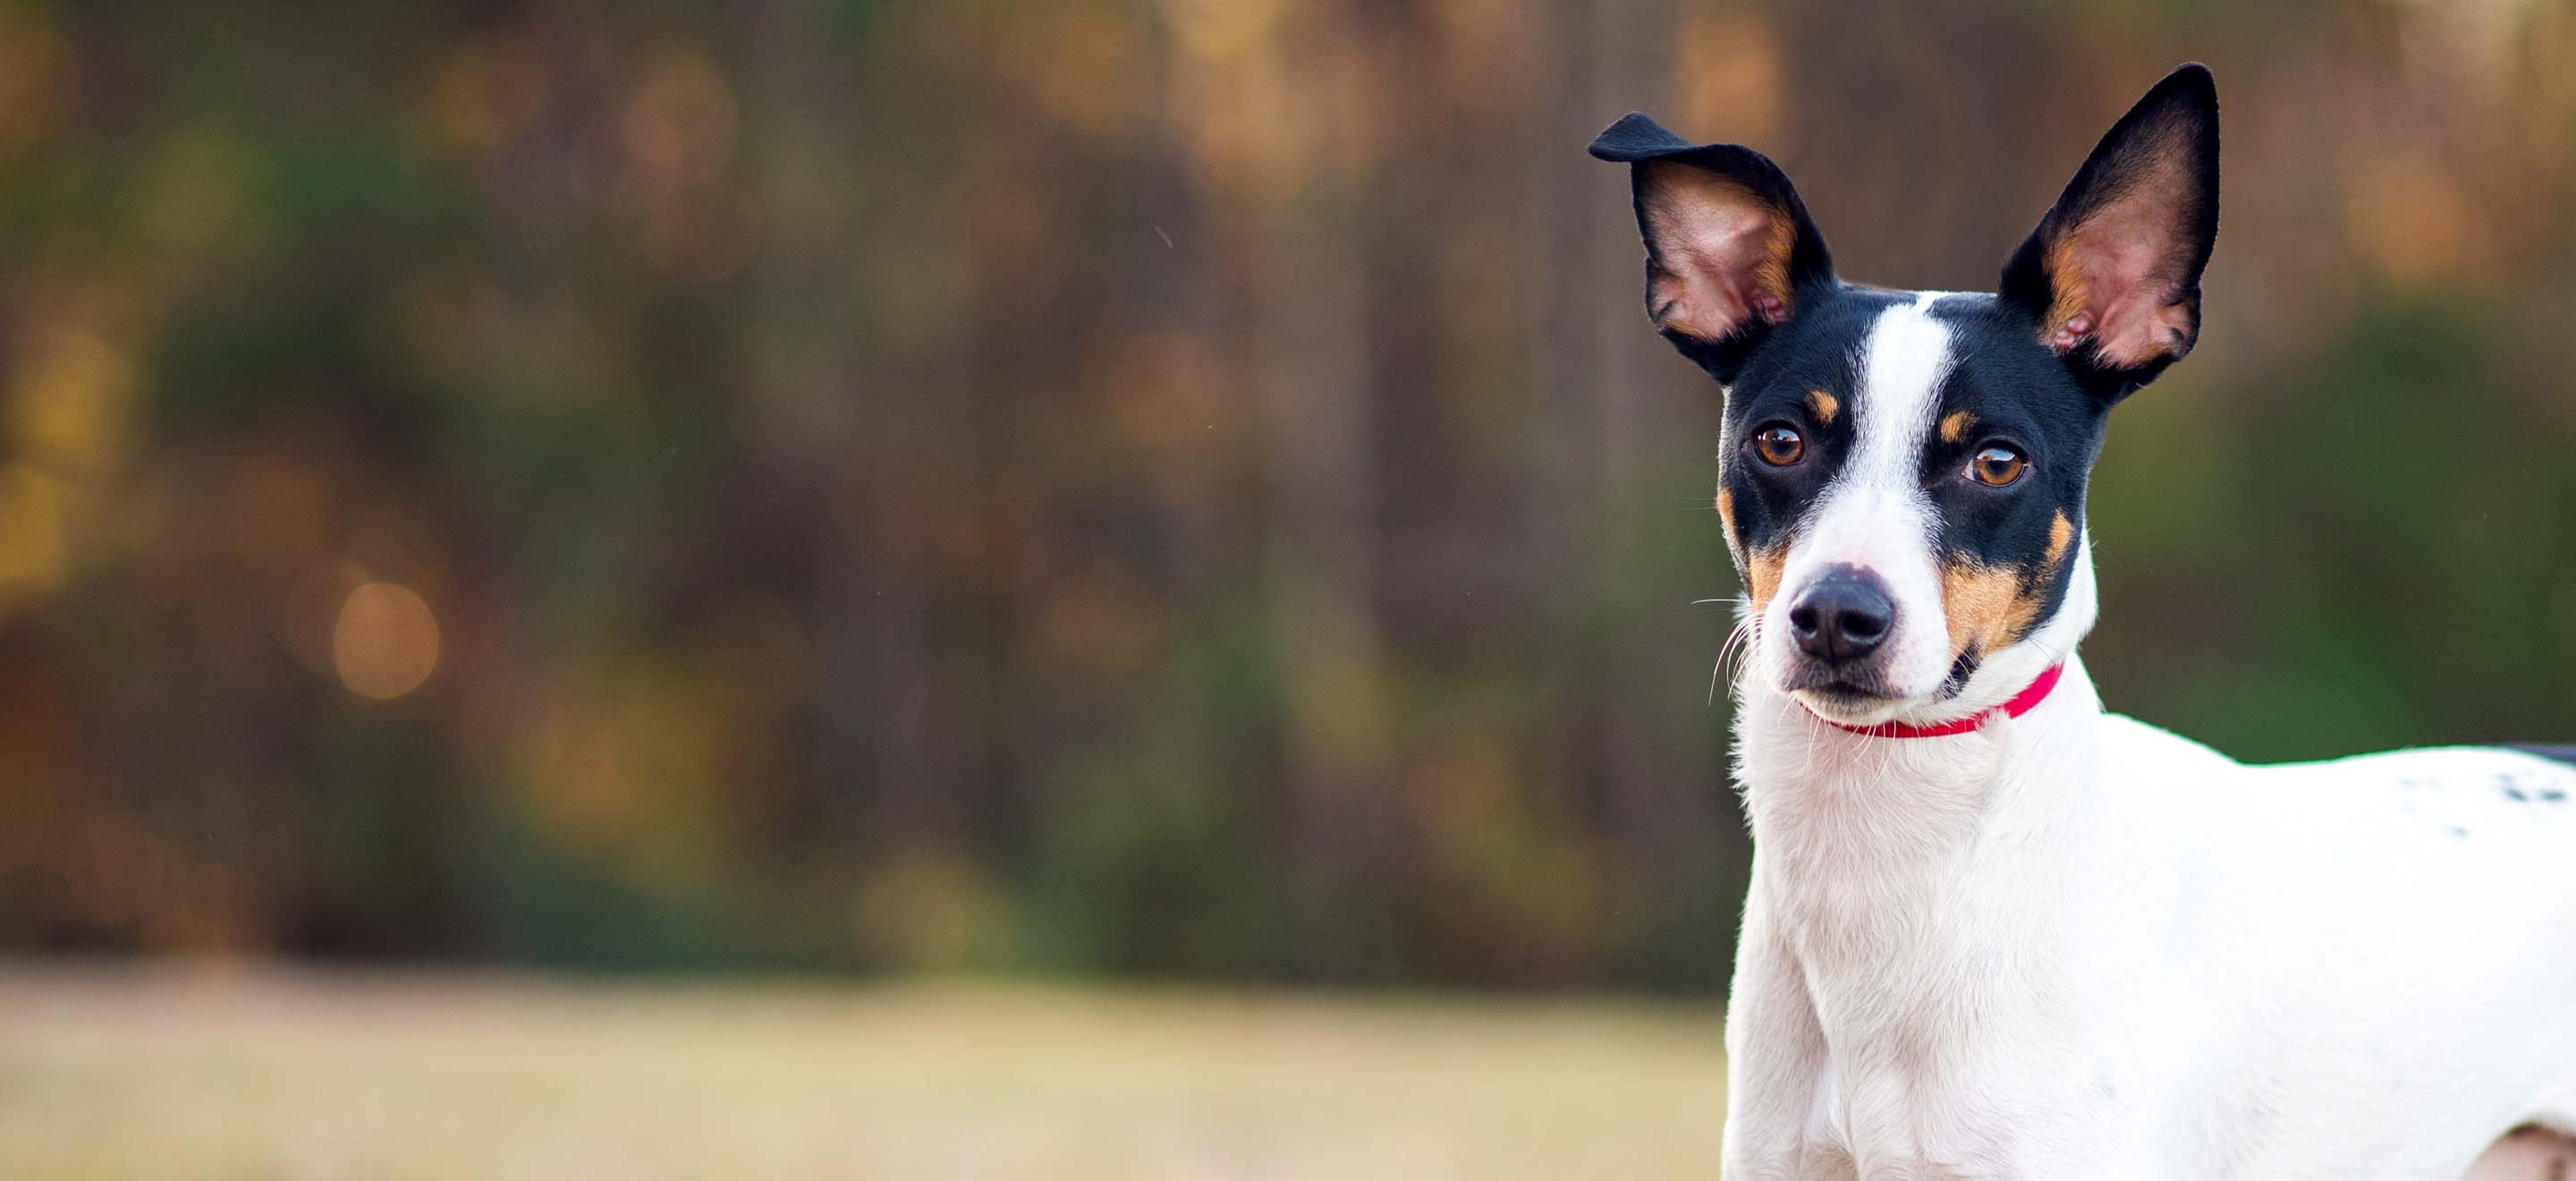 A Rat Terrier dog standing in a field in autumn image